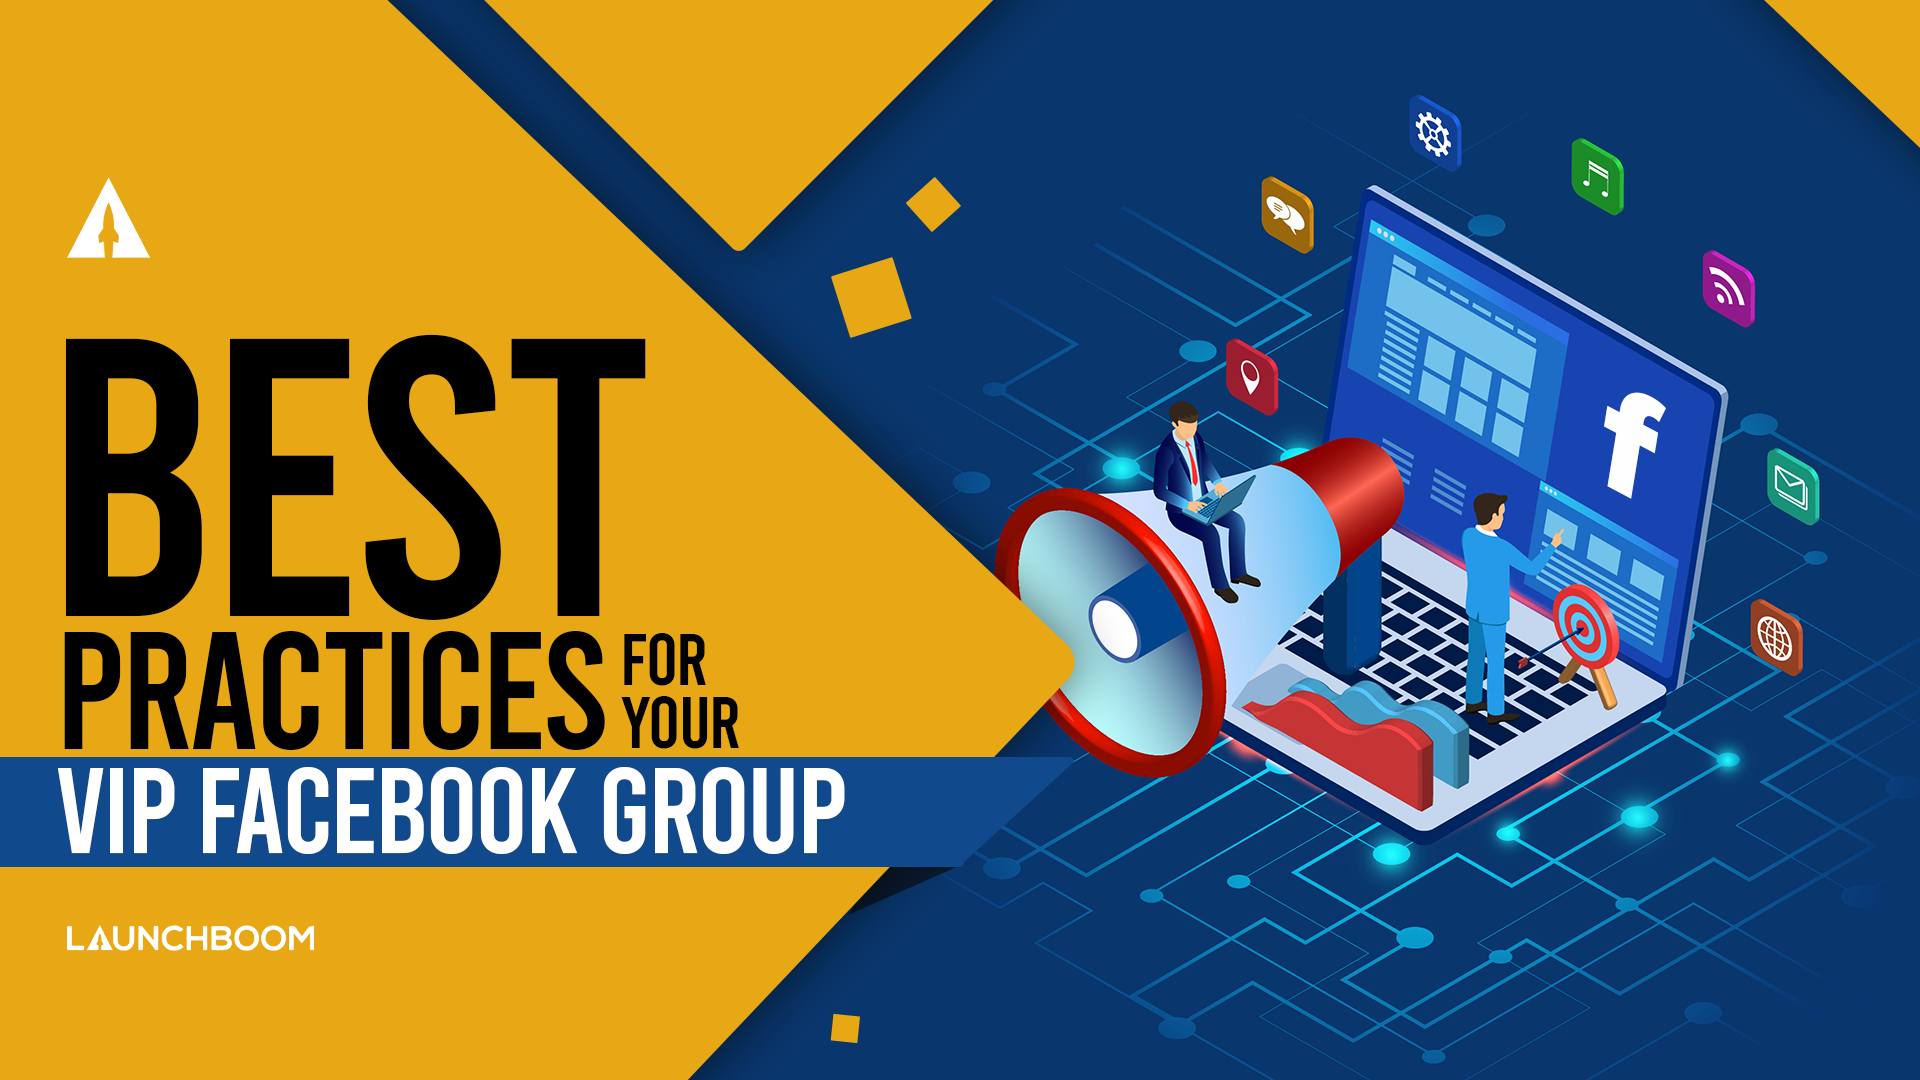 Best practices for your VIP Facebook group